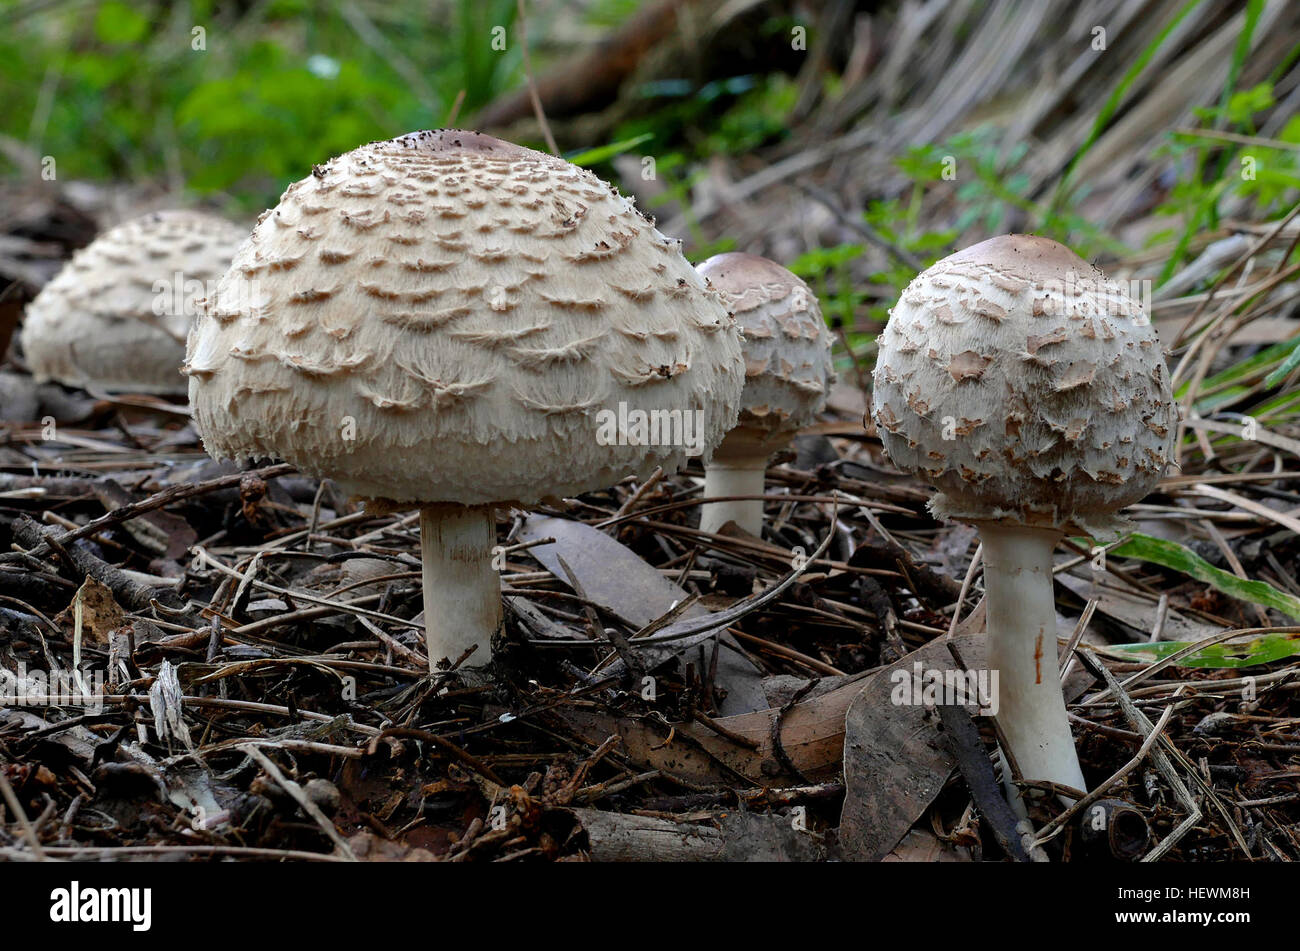 The shaggy parasol is a large and conspicuous agaric, with thick brown scales and protuberances on its fleshy white cap. The gills and spore print are both white in colour. Its stipe is slender, but bulbous at the base, is coloured uniformly and bears no patterns. It is fleshy, and a reddish, or maroon discoloration occurs and a pungent odour is evolved when it is cut. The egg-shaped caps become wider and flatter as they mature. Stock Photo